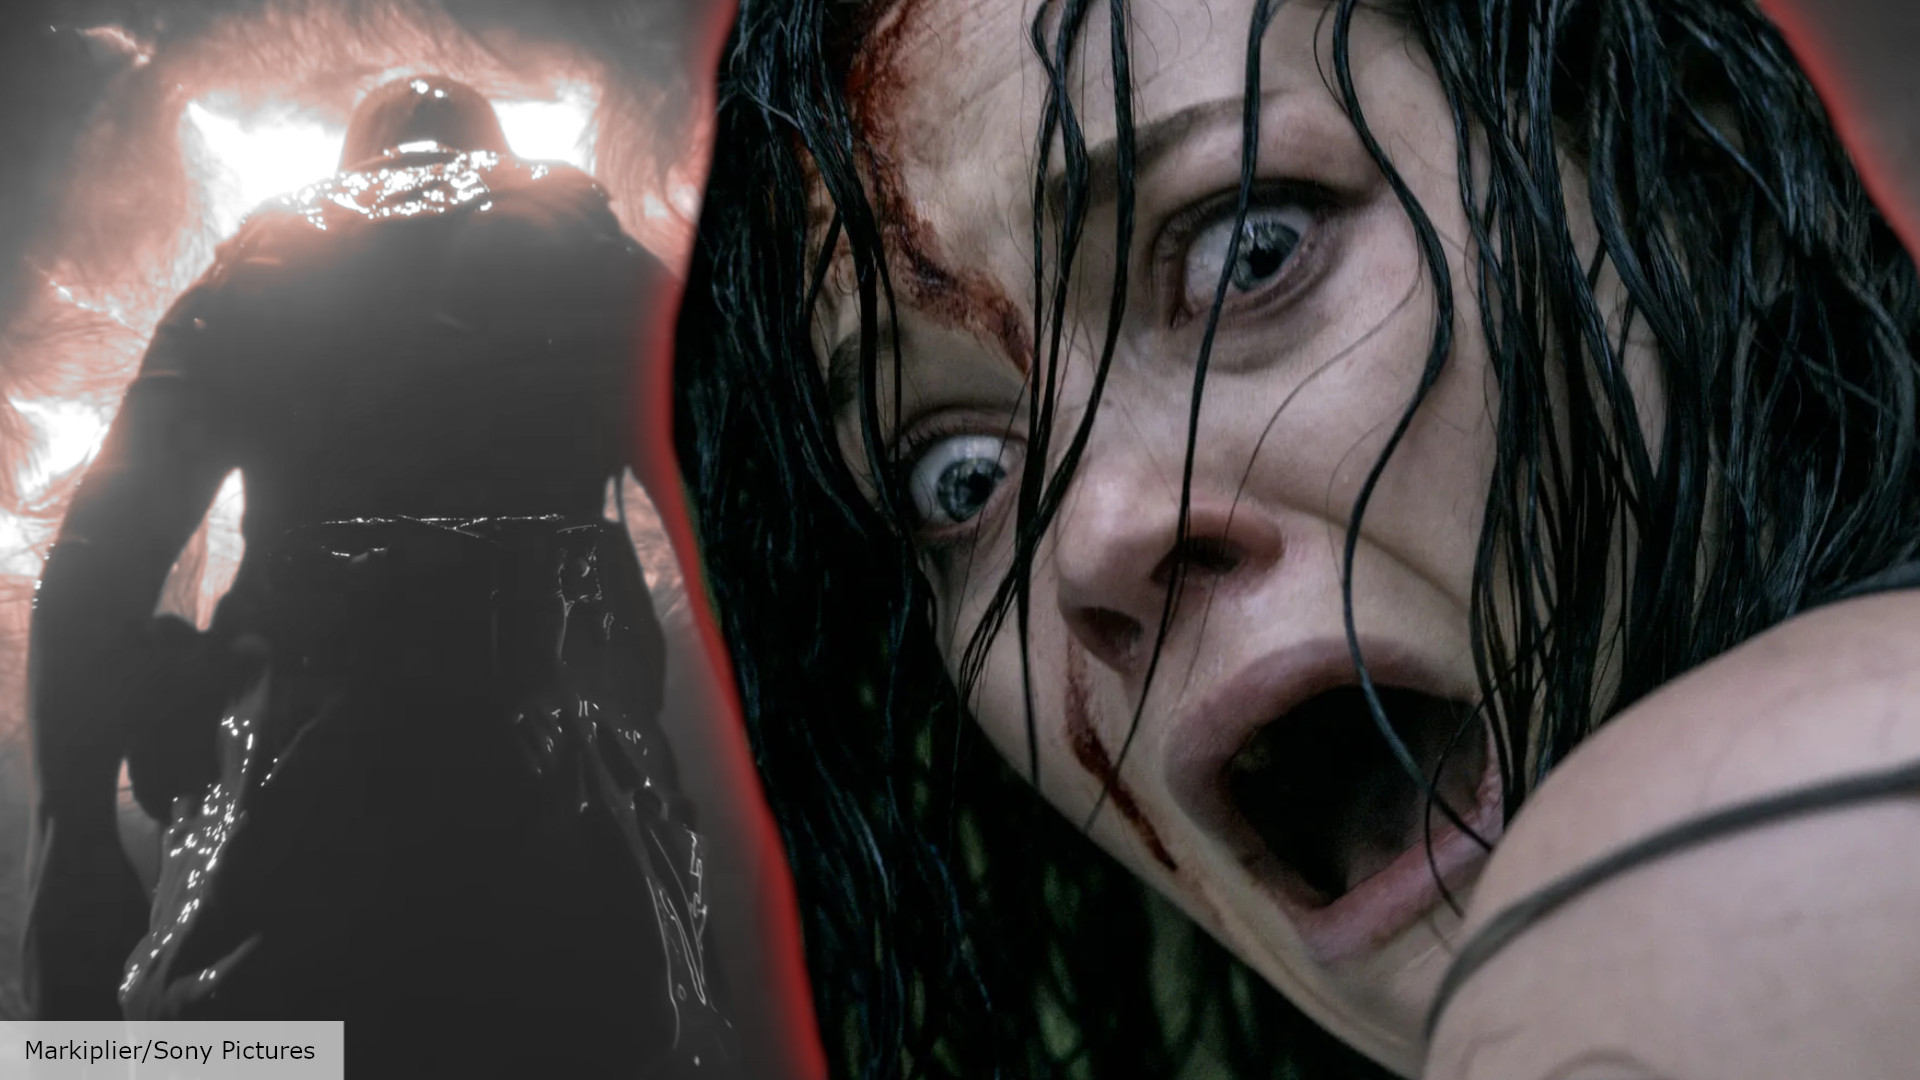 Evil Dead Rise Ending Explained, Post-Credits, Cast, and Plot - News